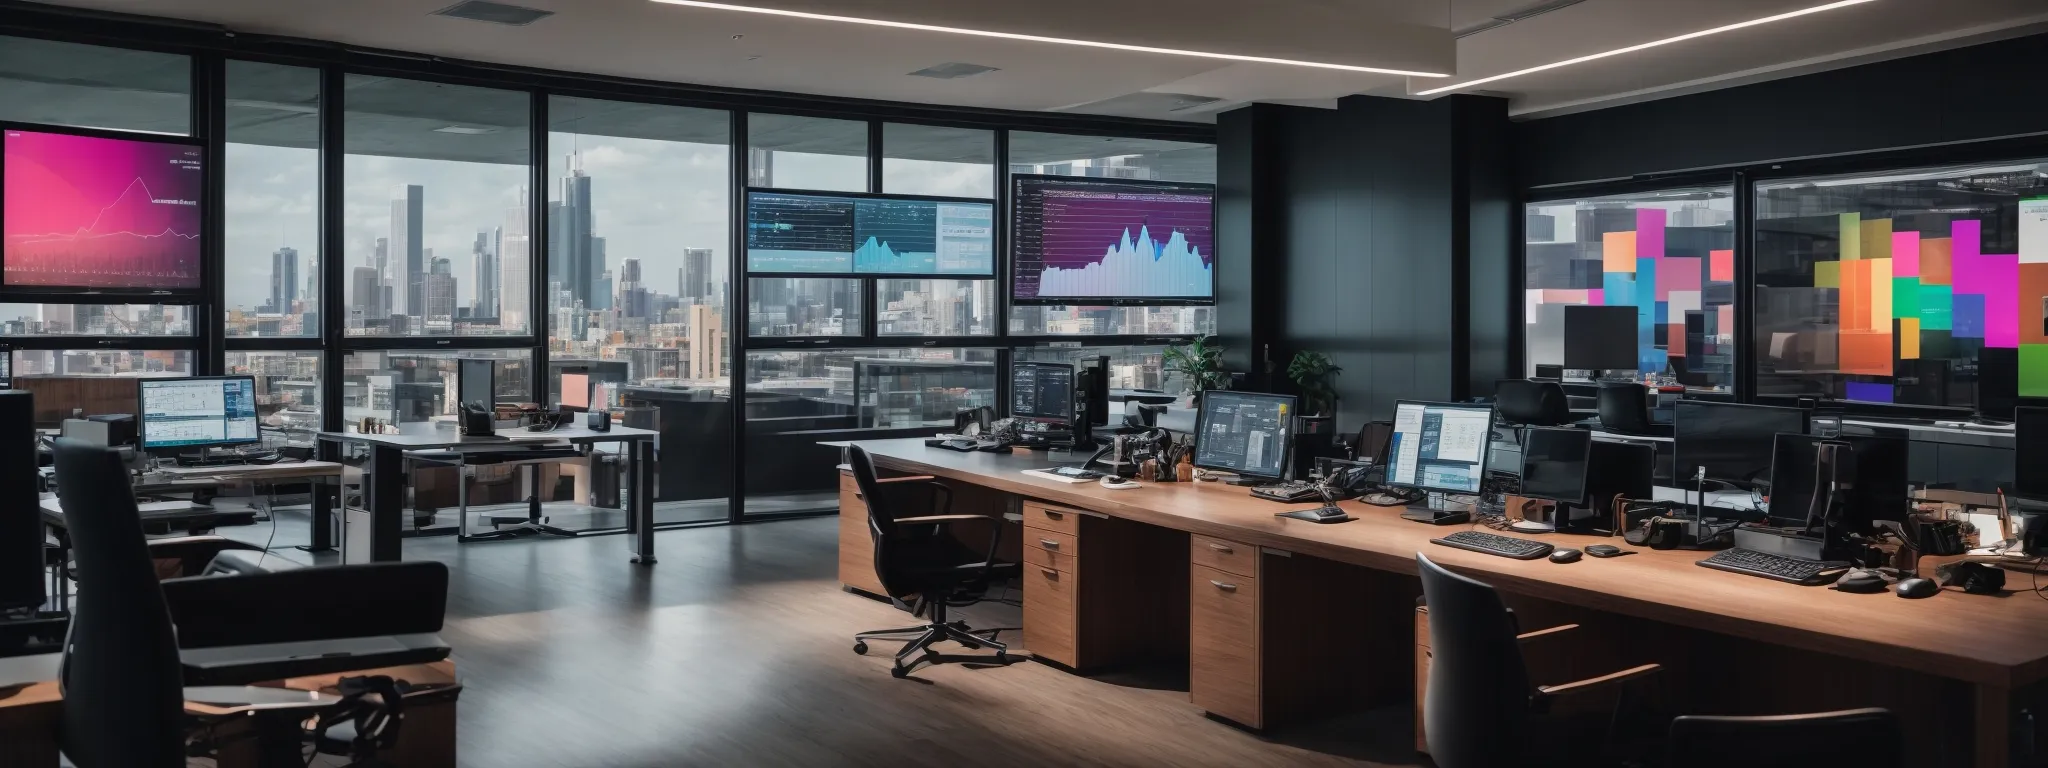 a sleek, modern office setting with multiple computer screens displaying colorful analytics and website development tools.